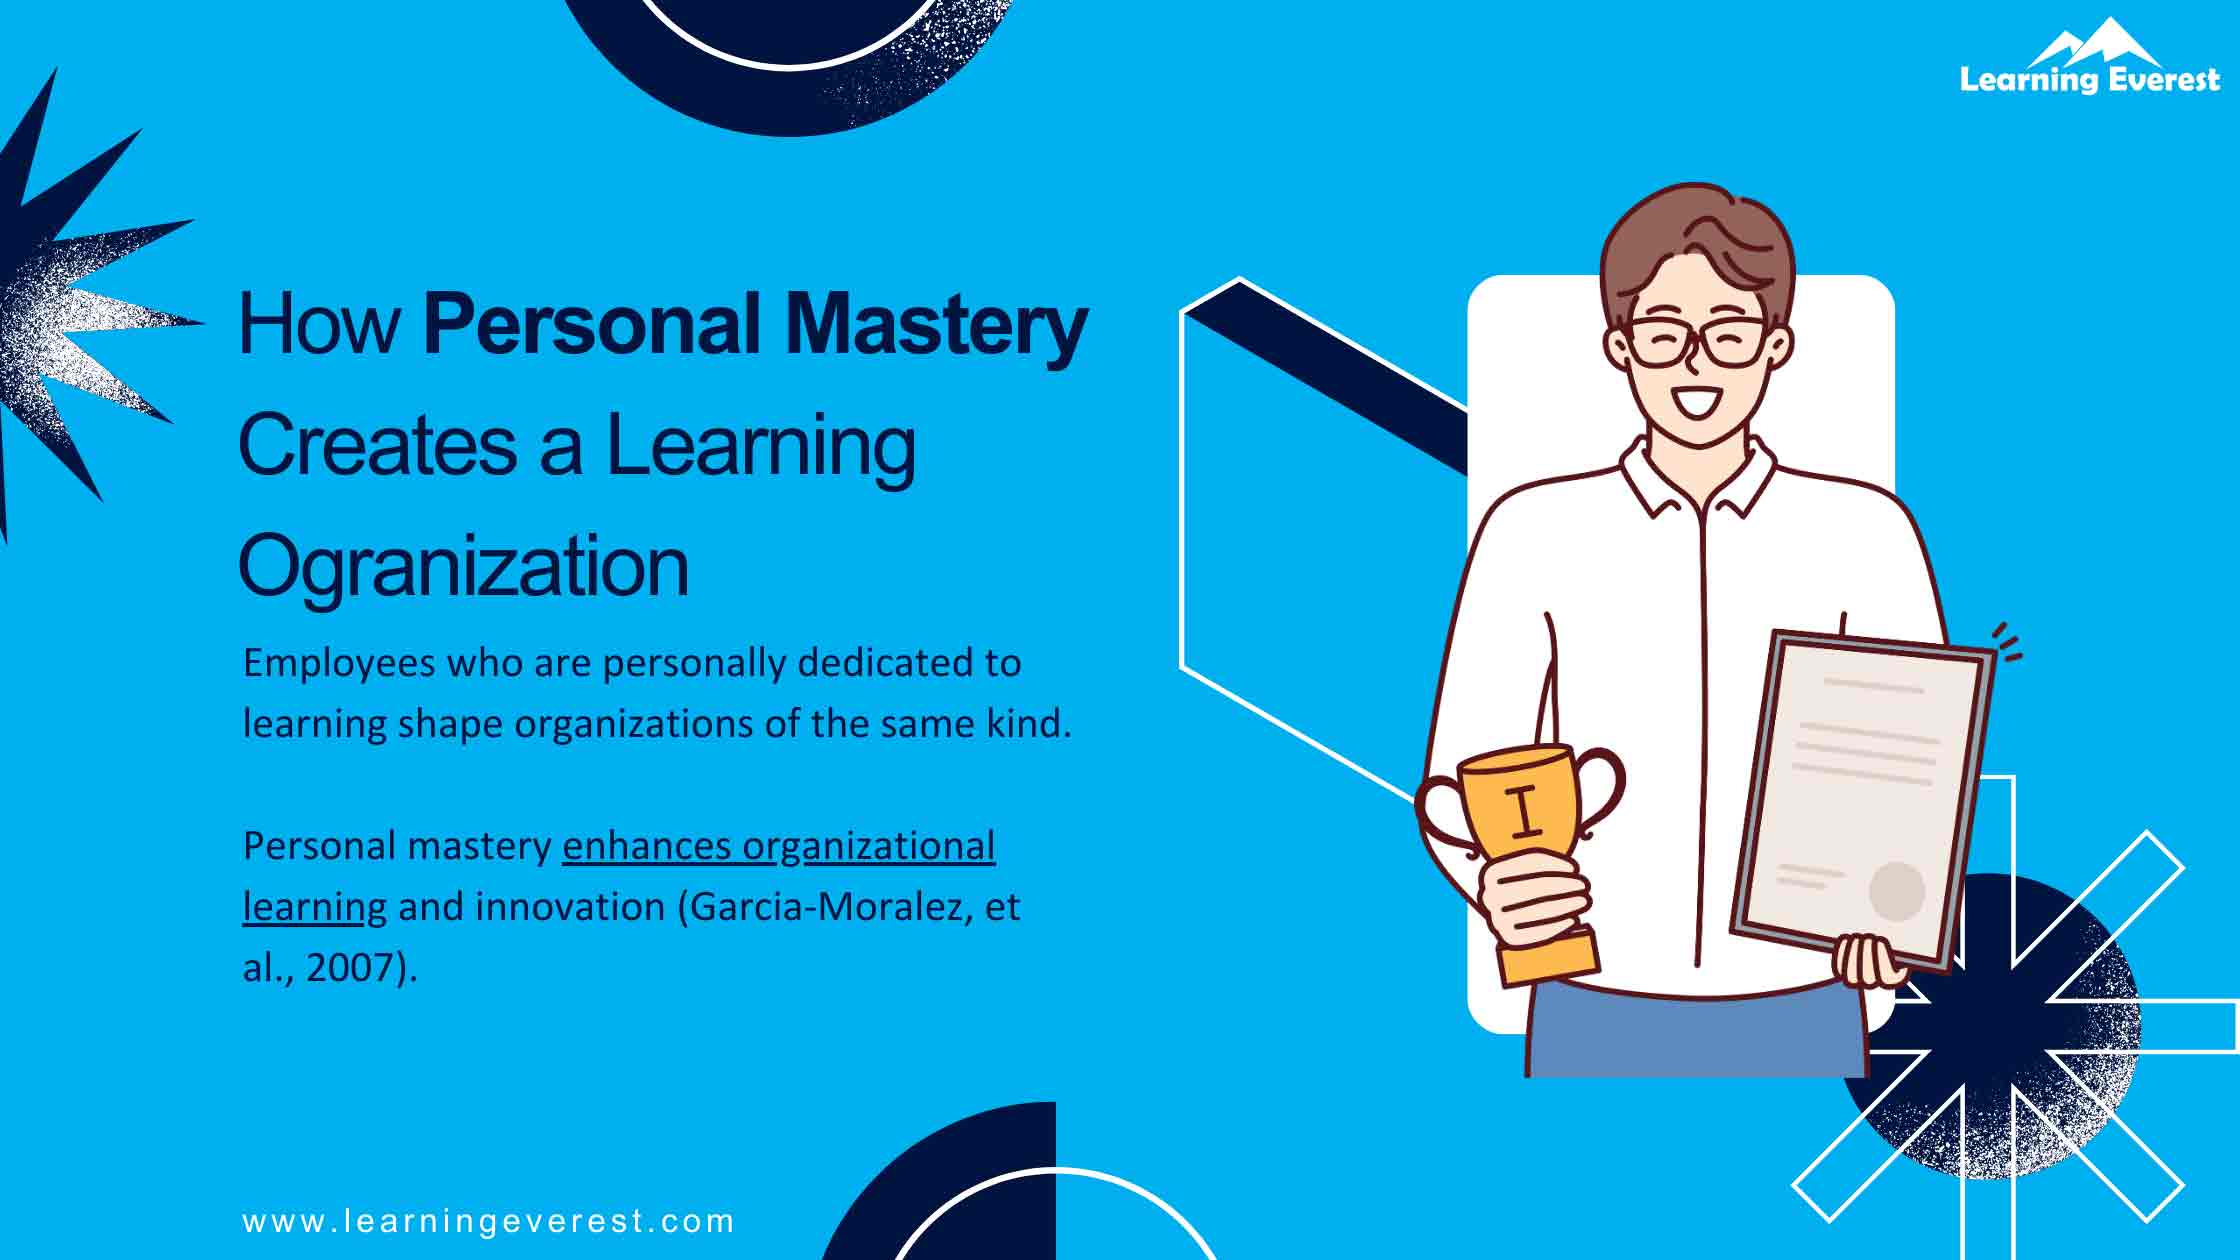 Disciplines of a Learning Organization - Personal Mastery